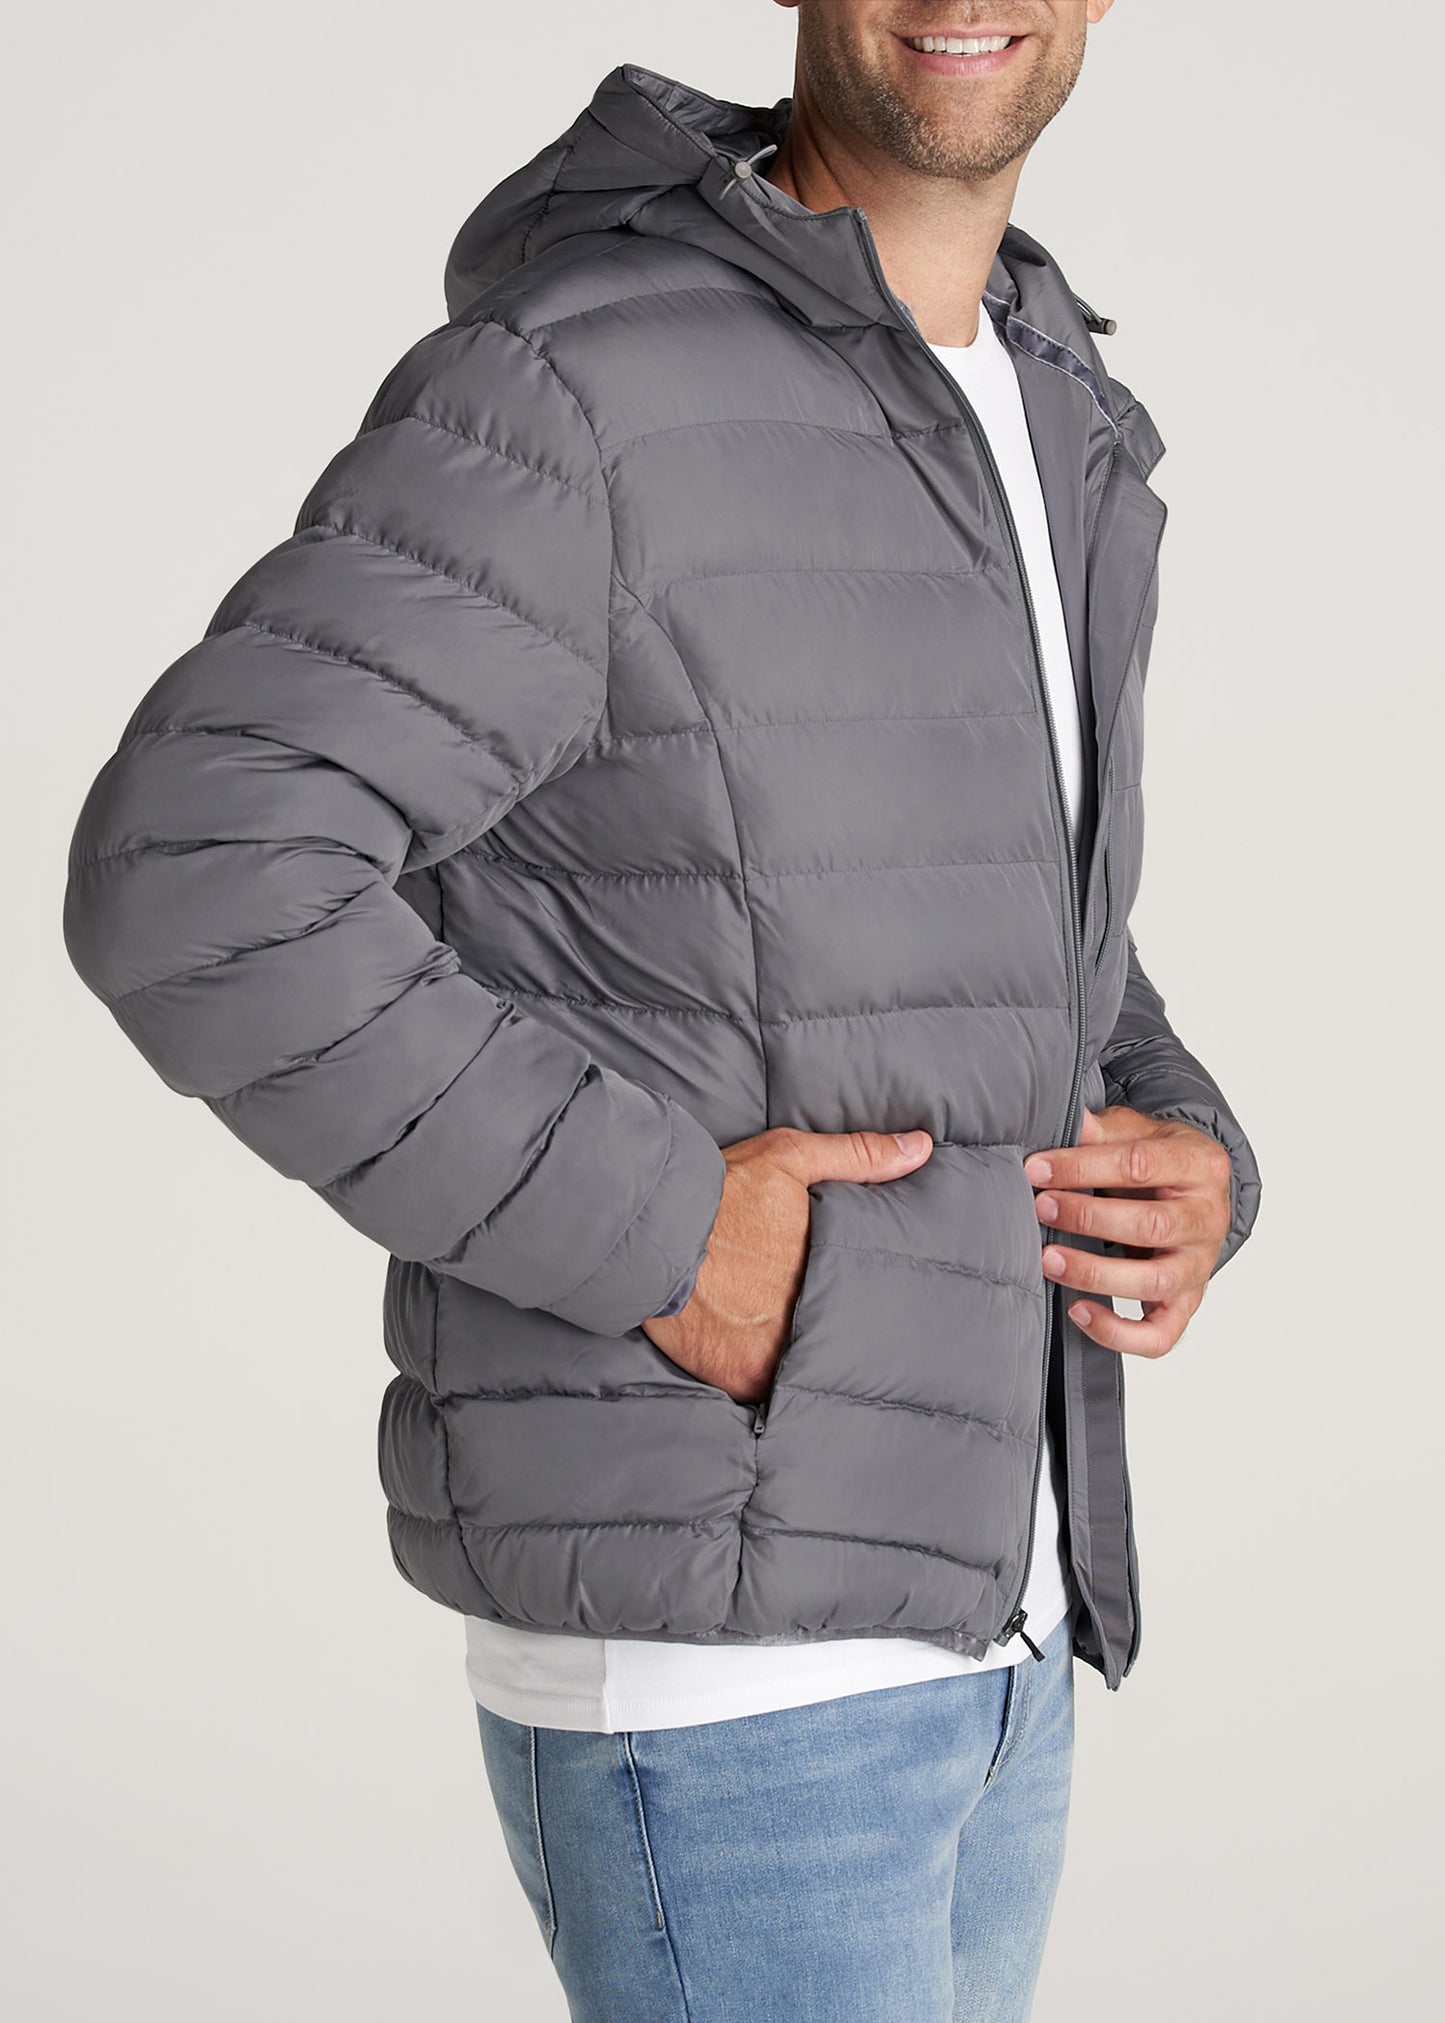 A tall man wearing American Tall's Medium-Weight Tall Puffer Jacket for Men in Charcoal.